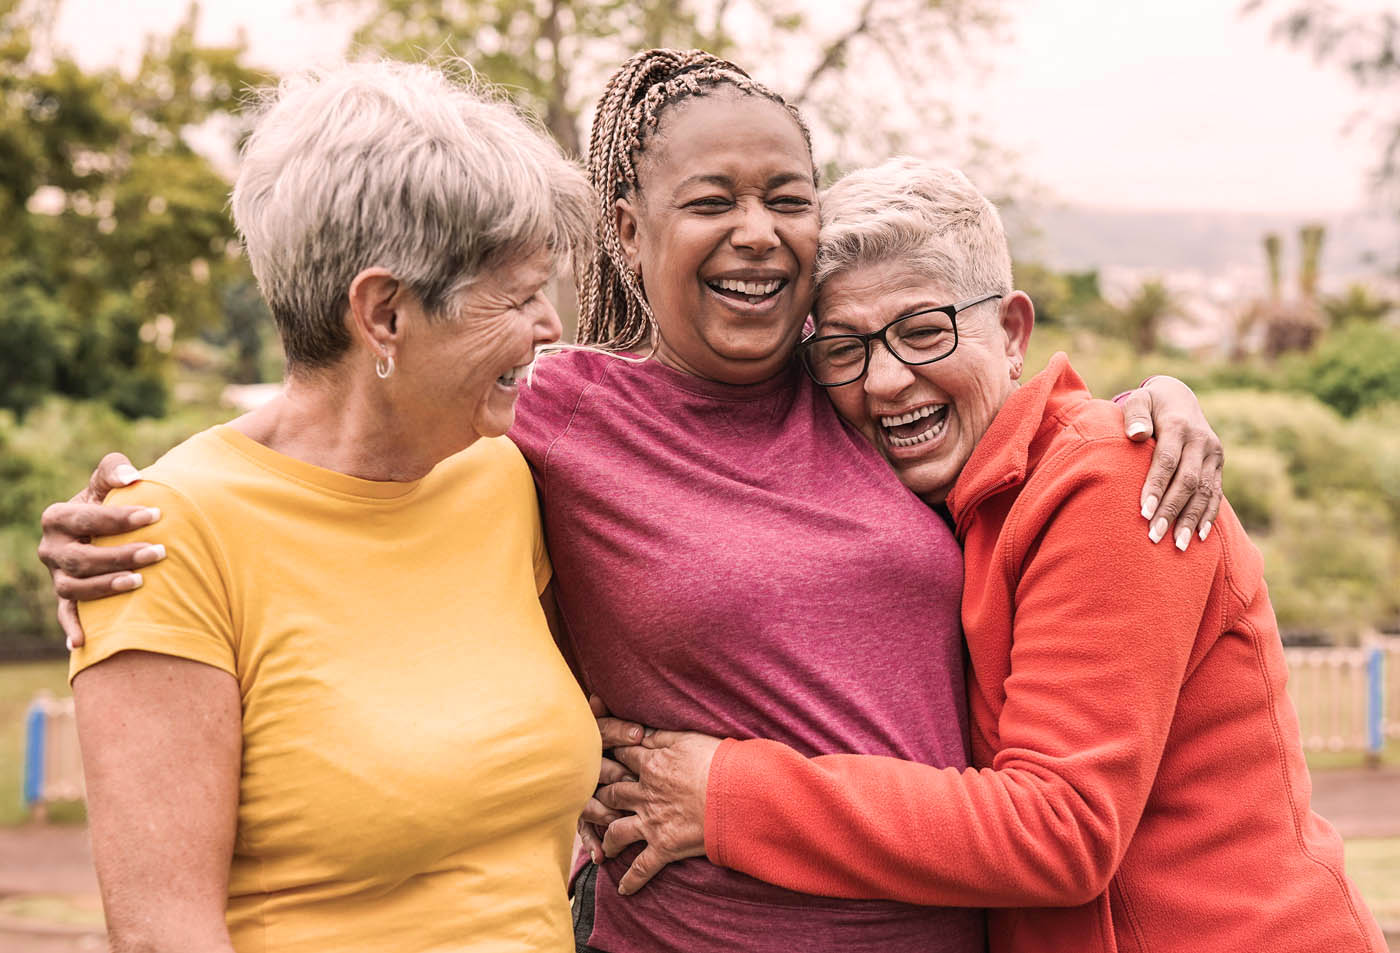 A group of elderly women laughing and hugging each other - discover St. Charles multiple sclerosis pain treatment today.